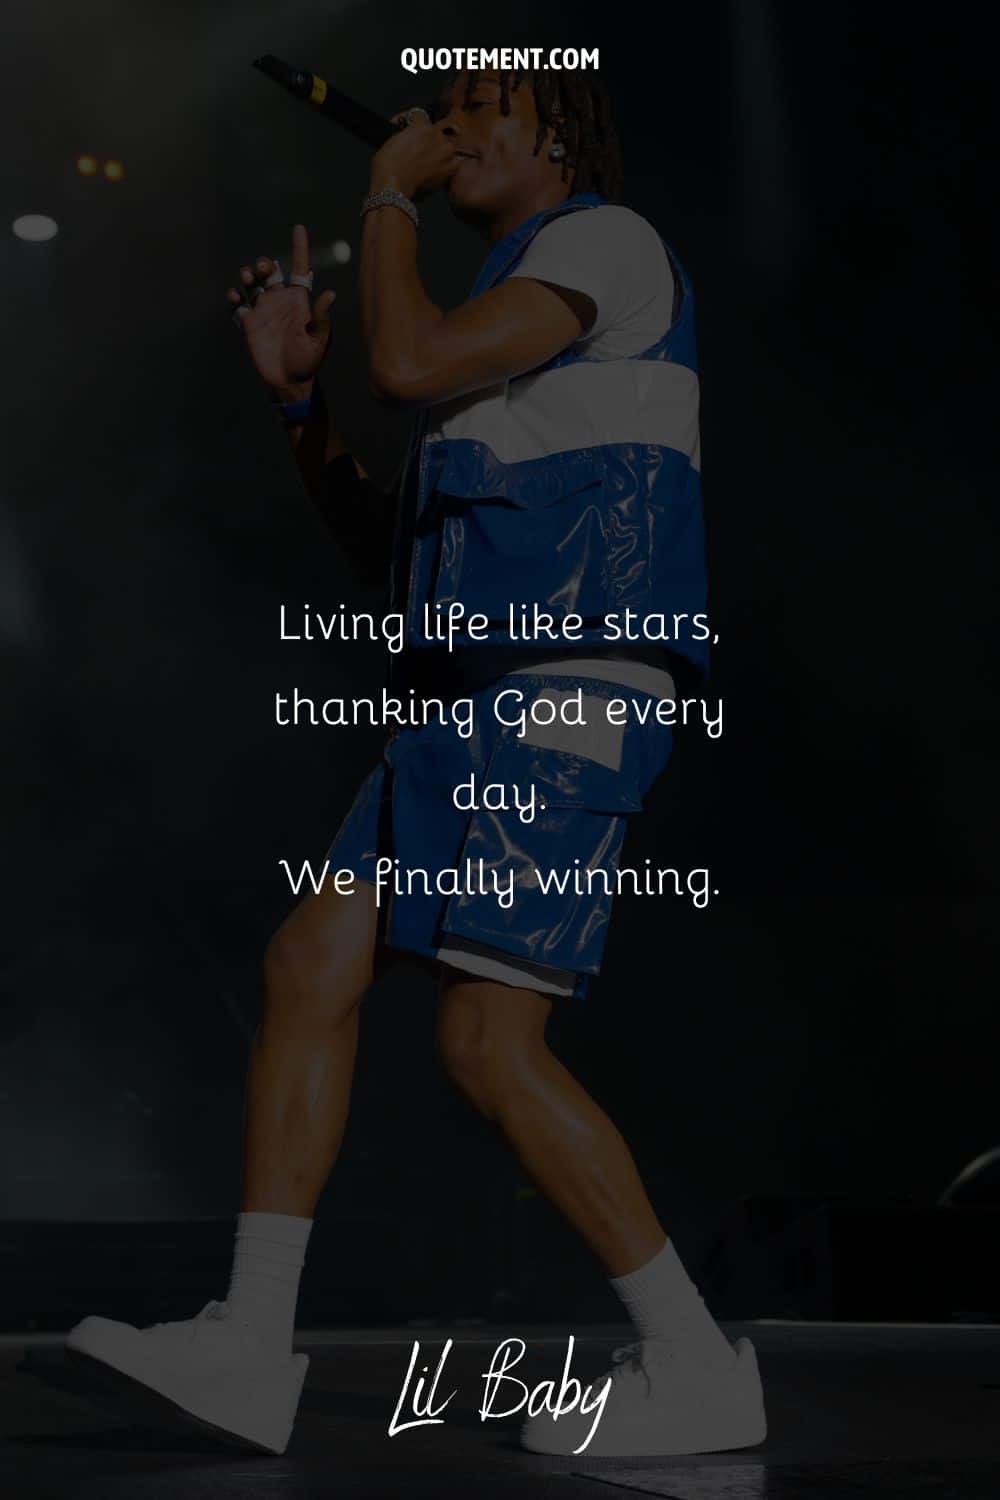 “Living life like stars, thanking God every day. We finally winning.” – Lil Baby